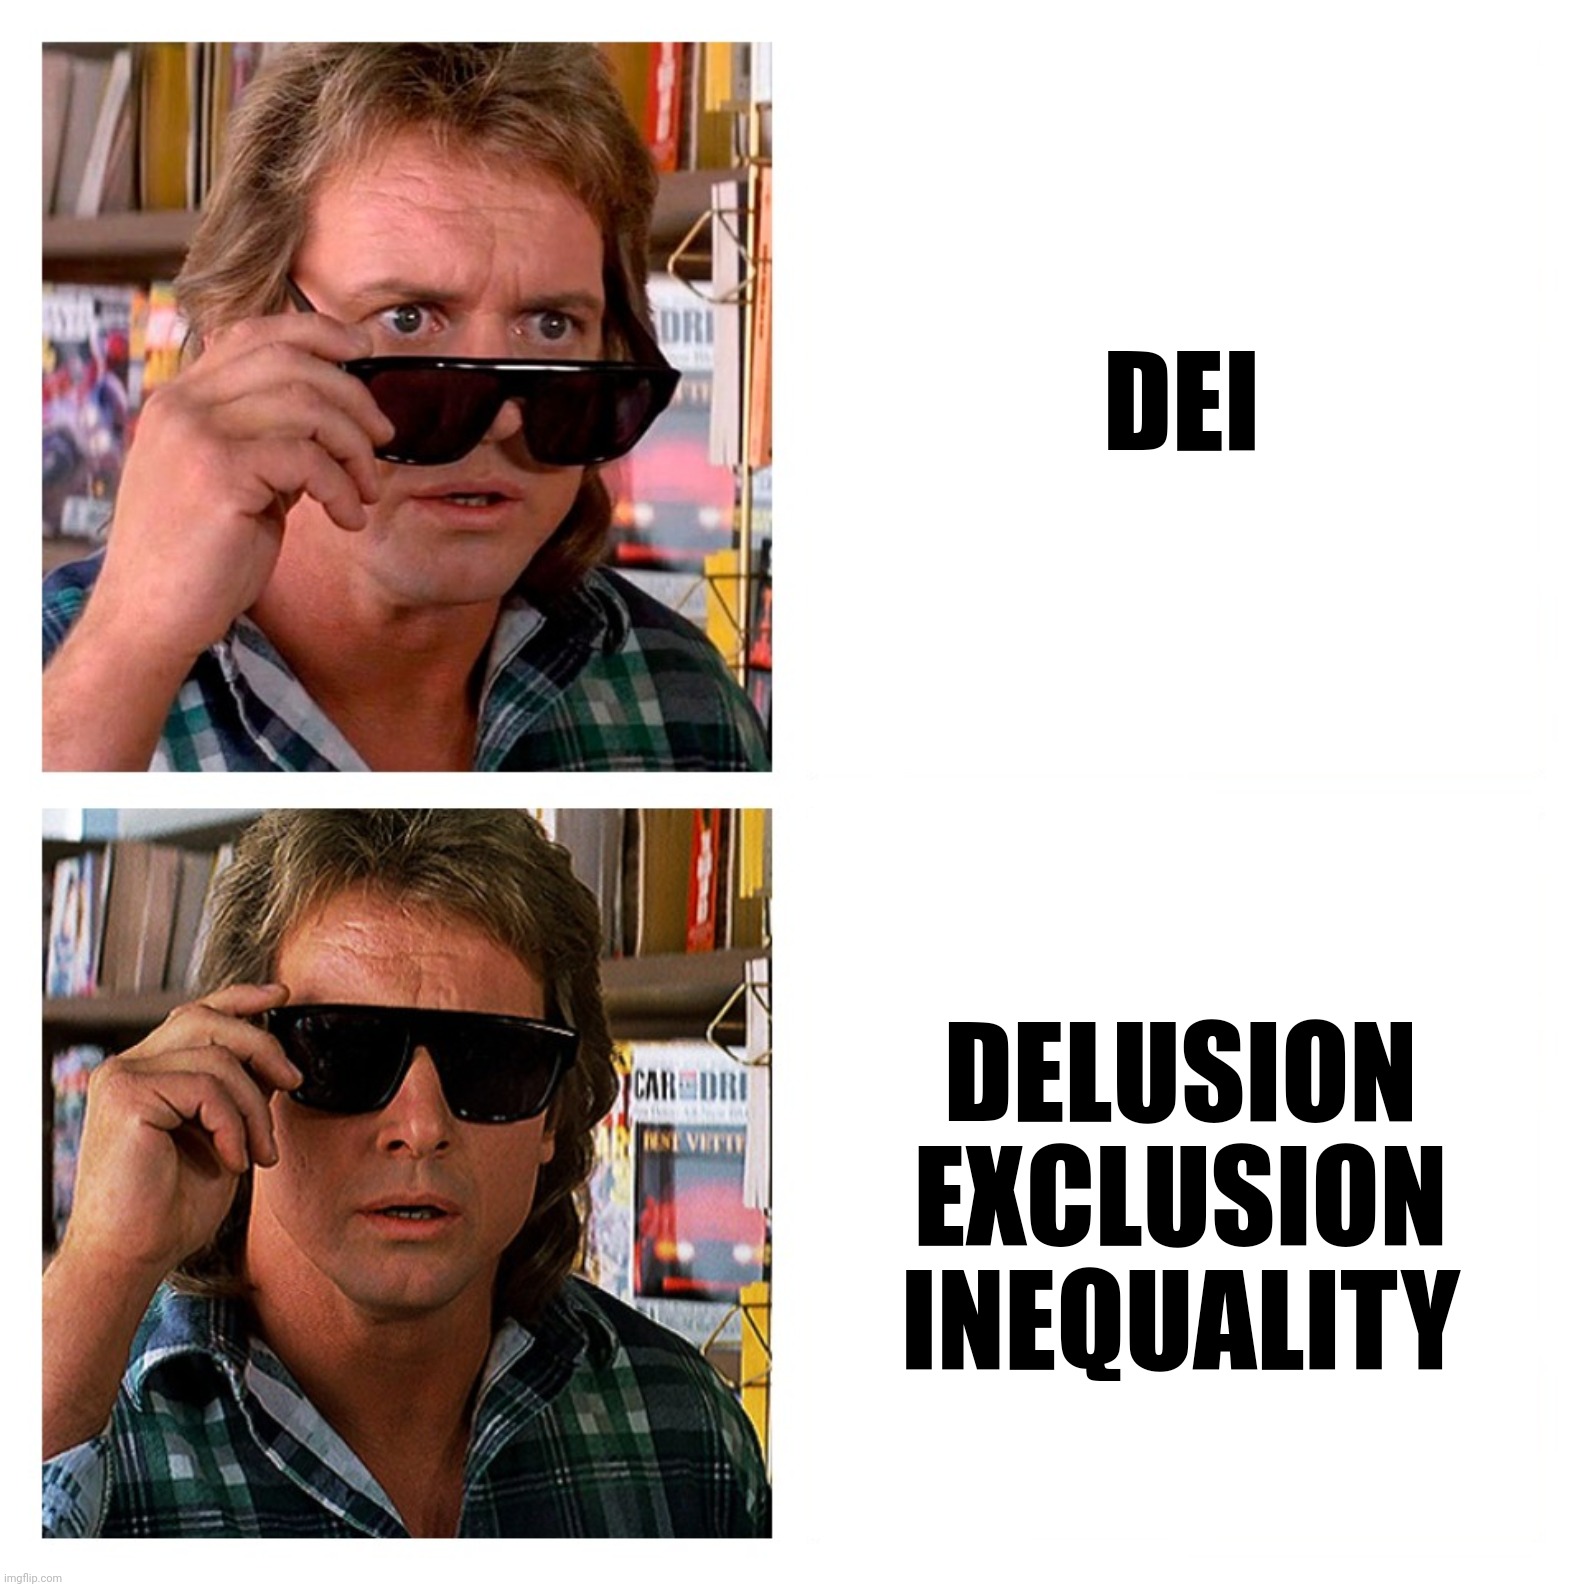 DEI DELUSION
EXCLUSION
INEQUALITY | made w/ Imgflip meme maker